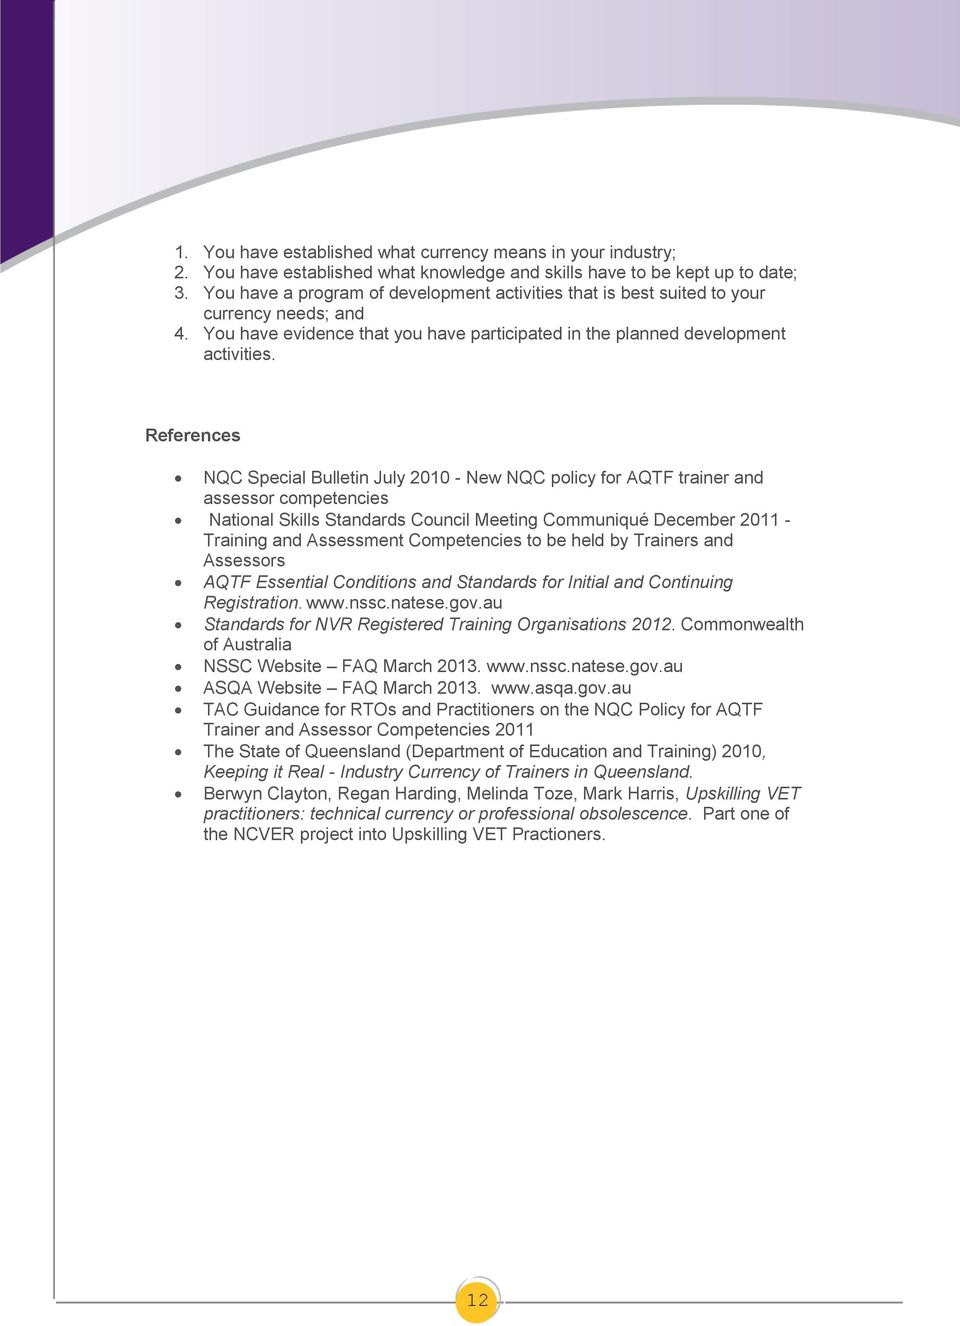 References NQC Special Bulletin July 2010 - New NQC policy for AQTF trainer and assessor competencies National Skills Standards Council Meeting Communiqué December 2011 - Training and Assessment